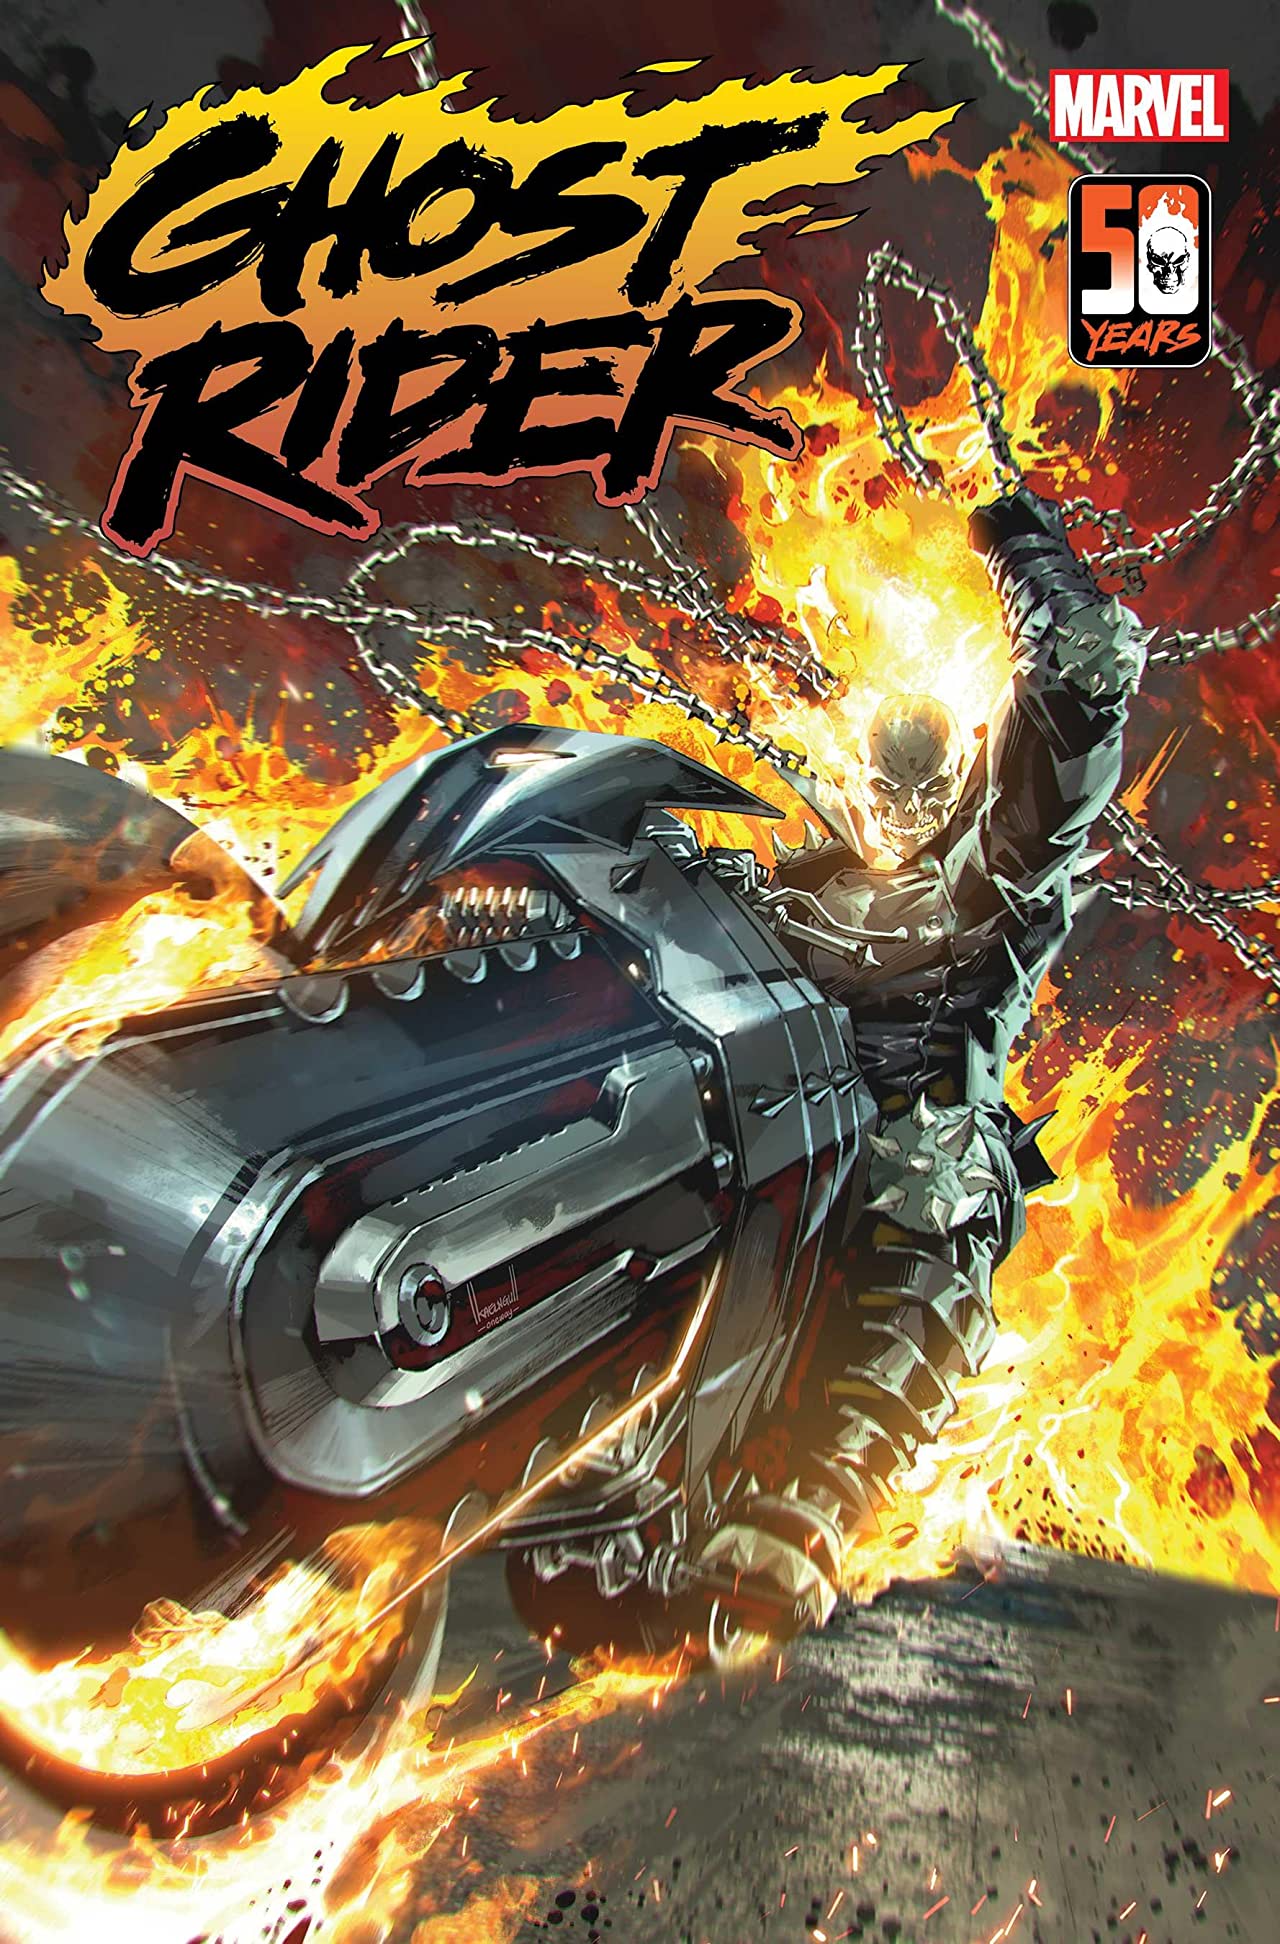 Exclusive: Writer Benjamin Percy teases new 'Ghost Rider' comic | SYFY WIRE